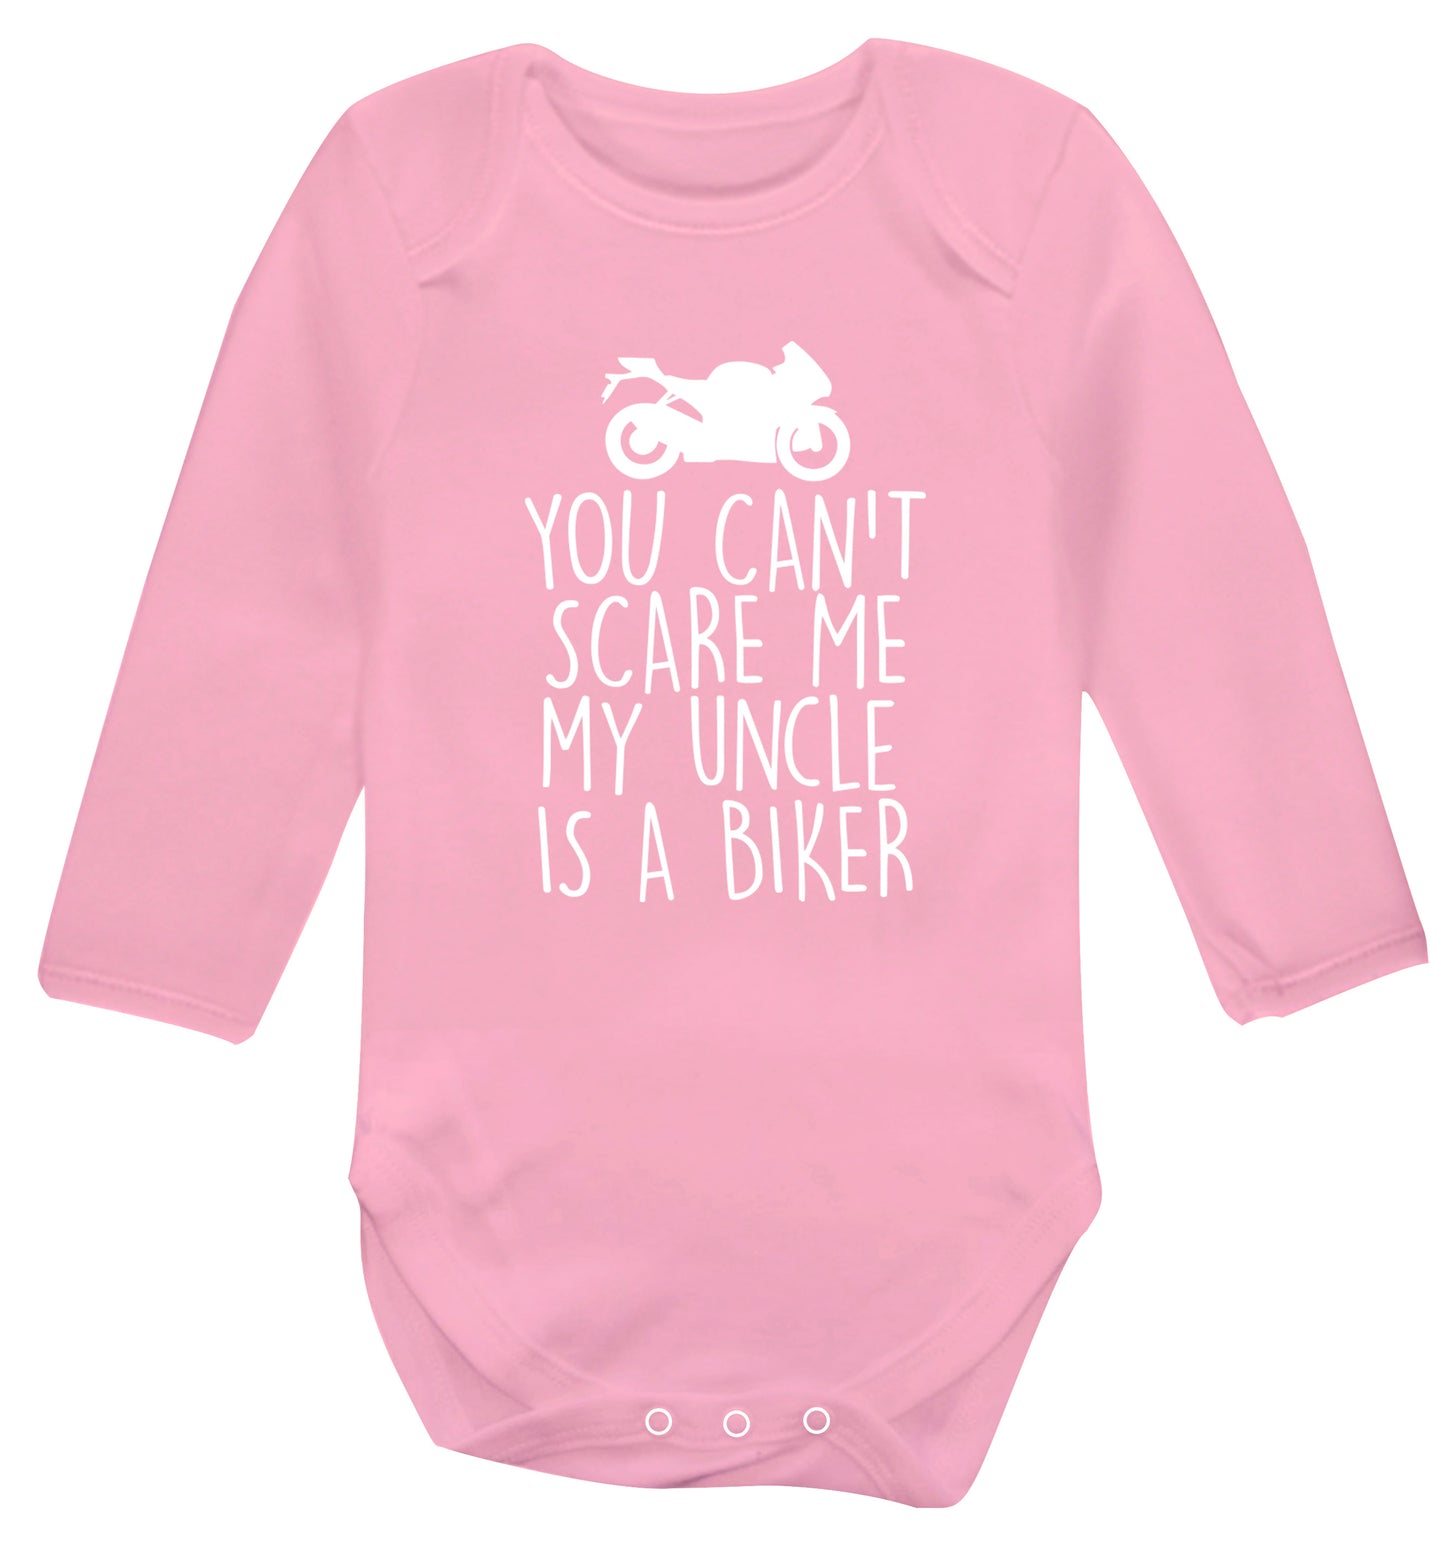 You can't scare me my uncle is a biker Baby Vest long sleeved pale pink 6-12 months